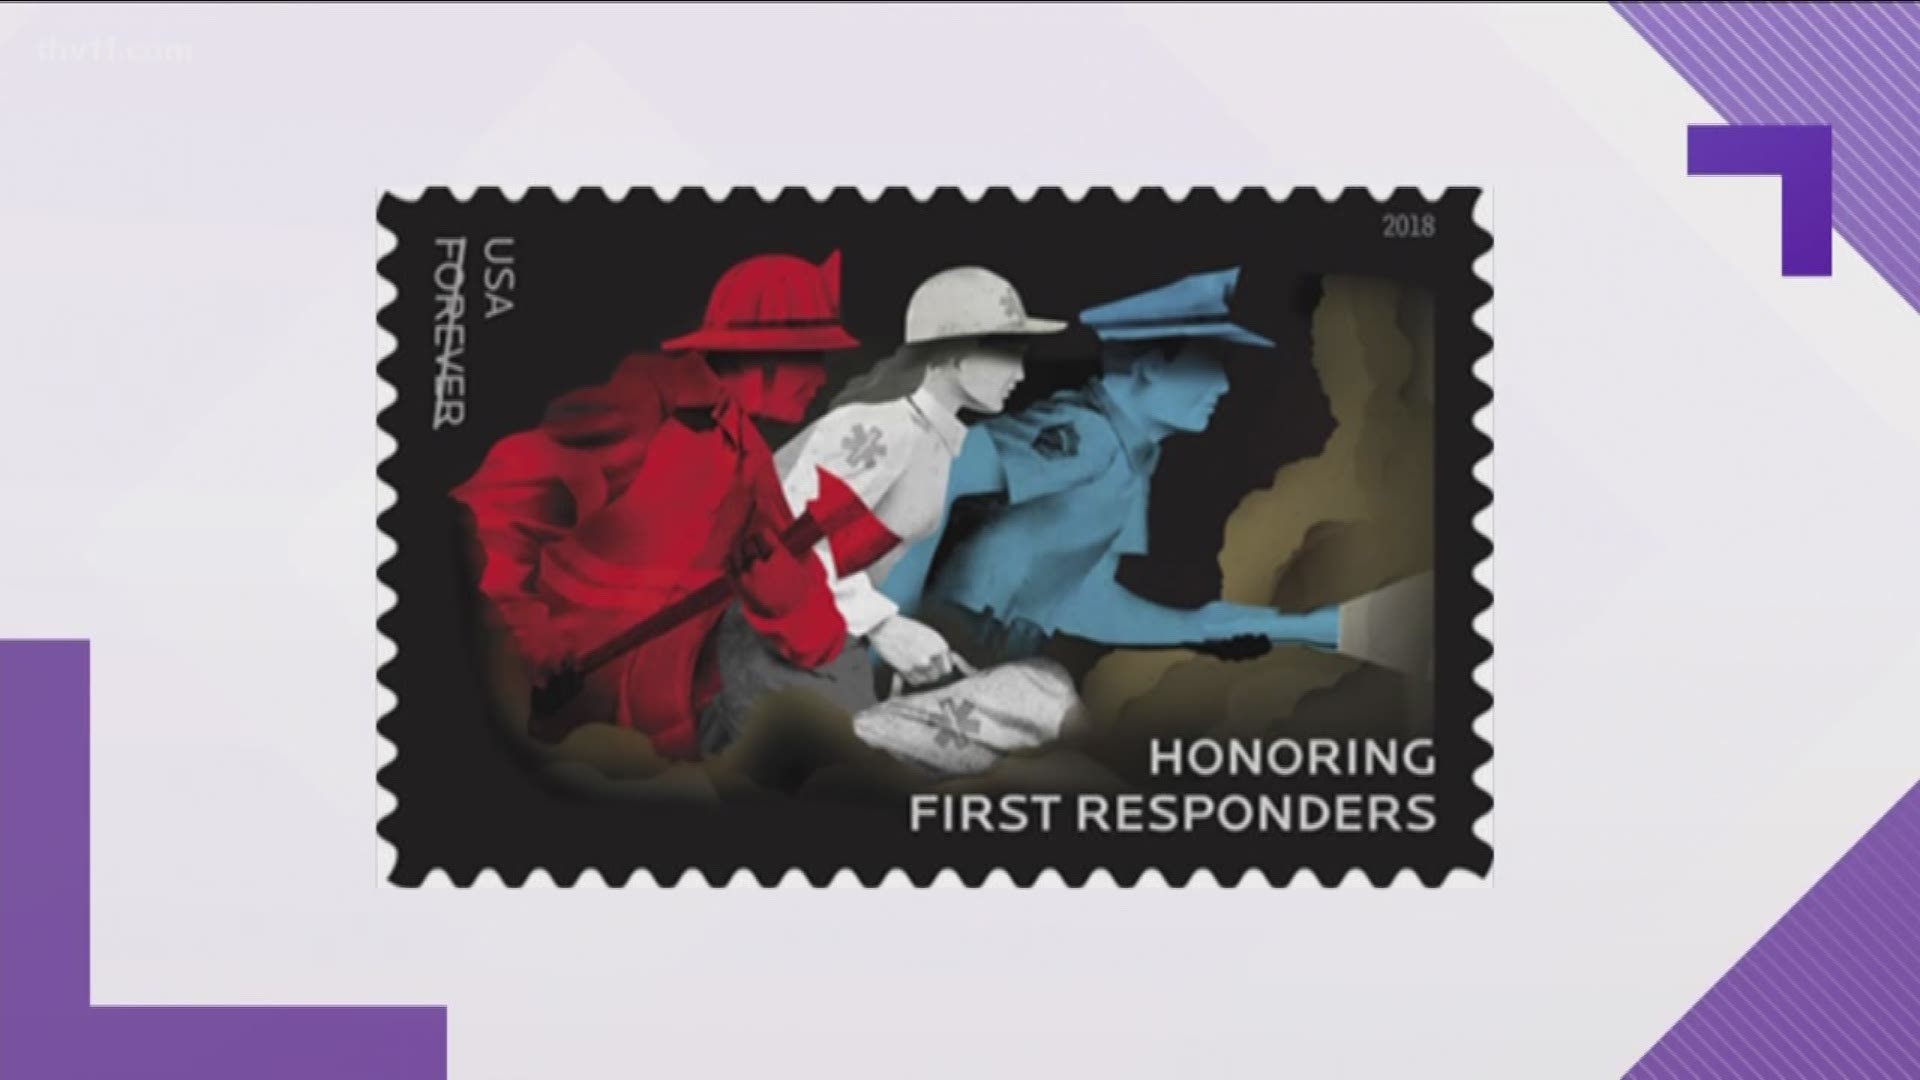 The stamp is dedicated to American first responders.